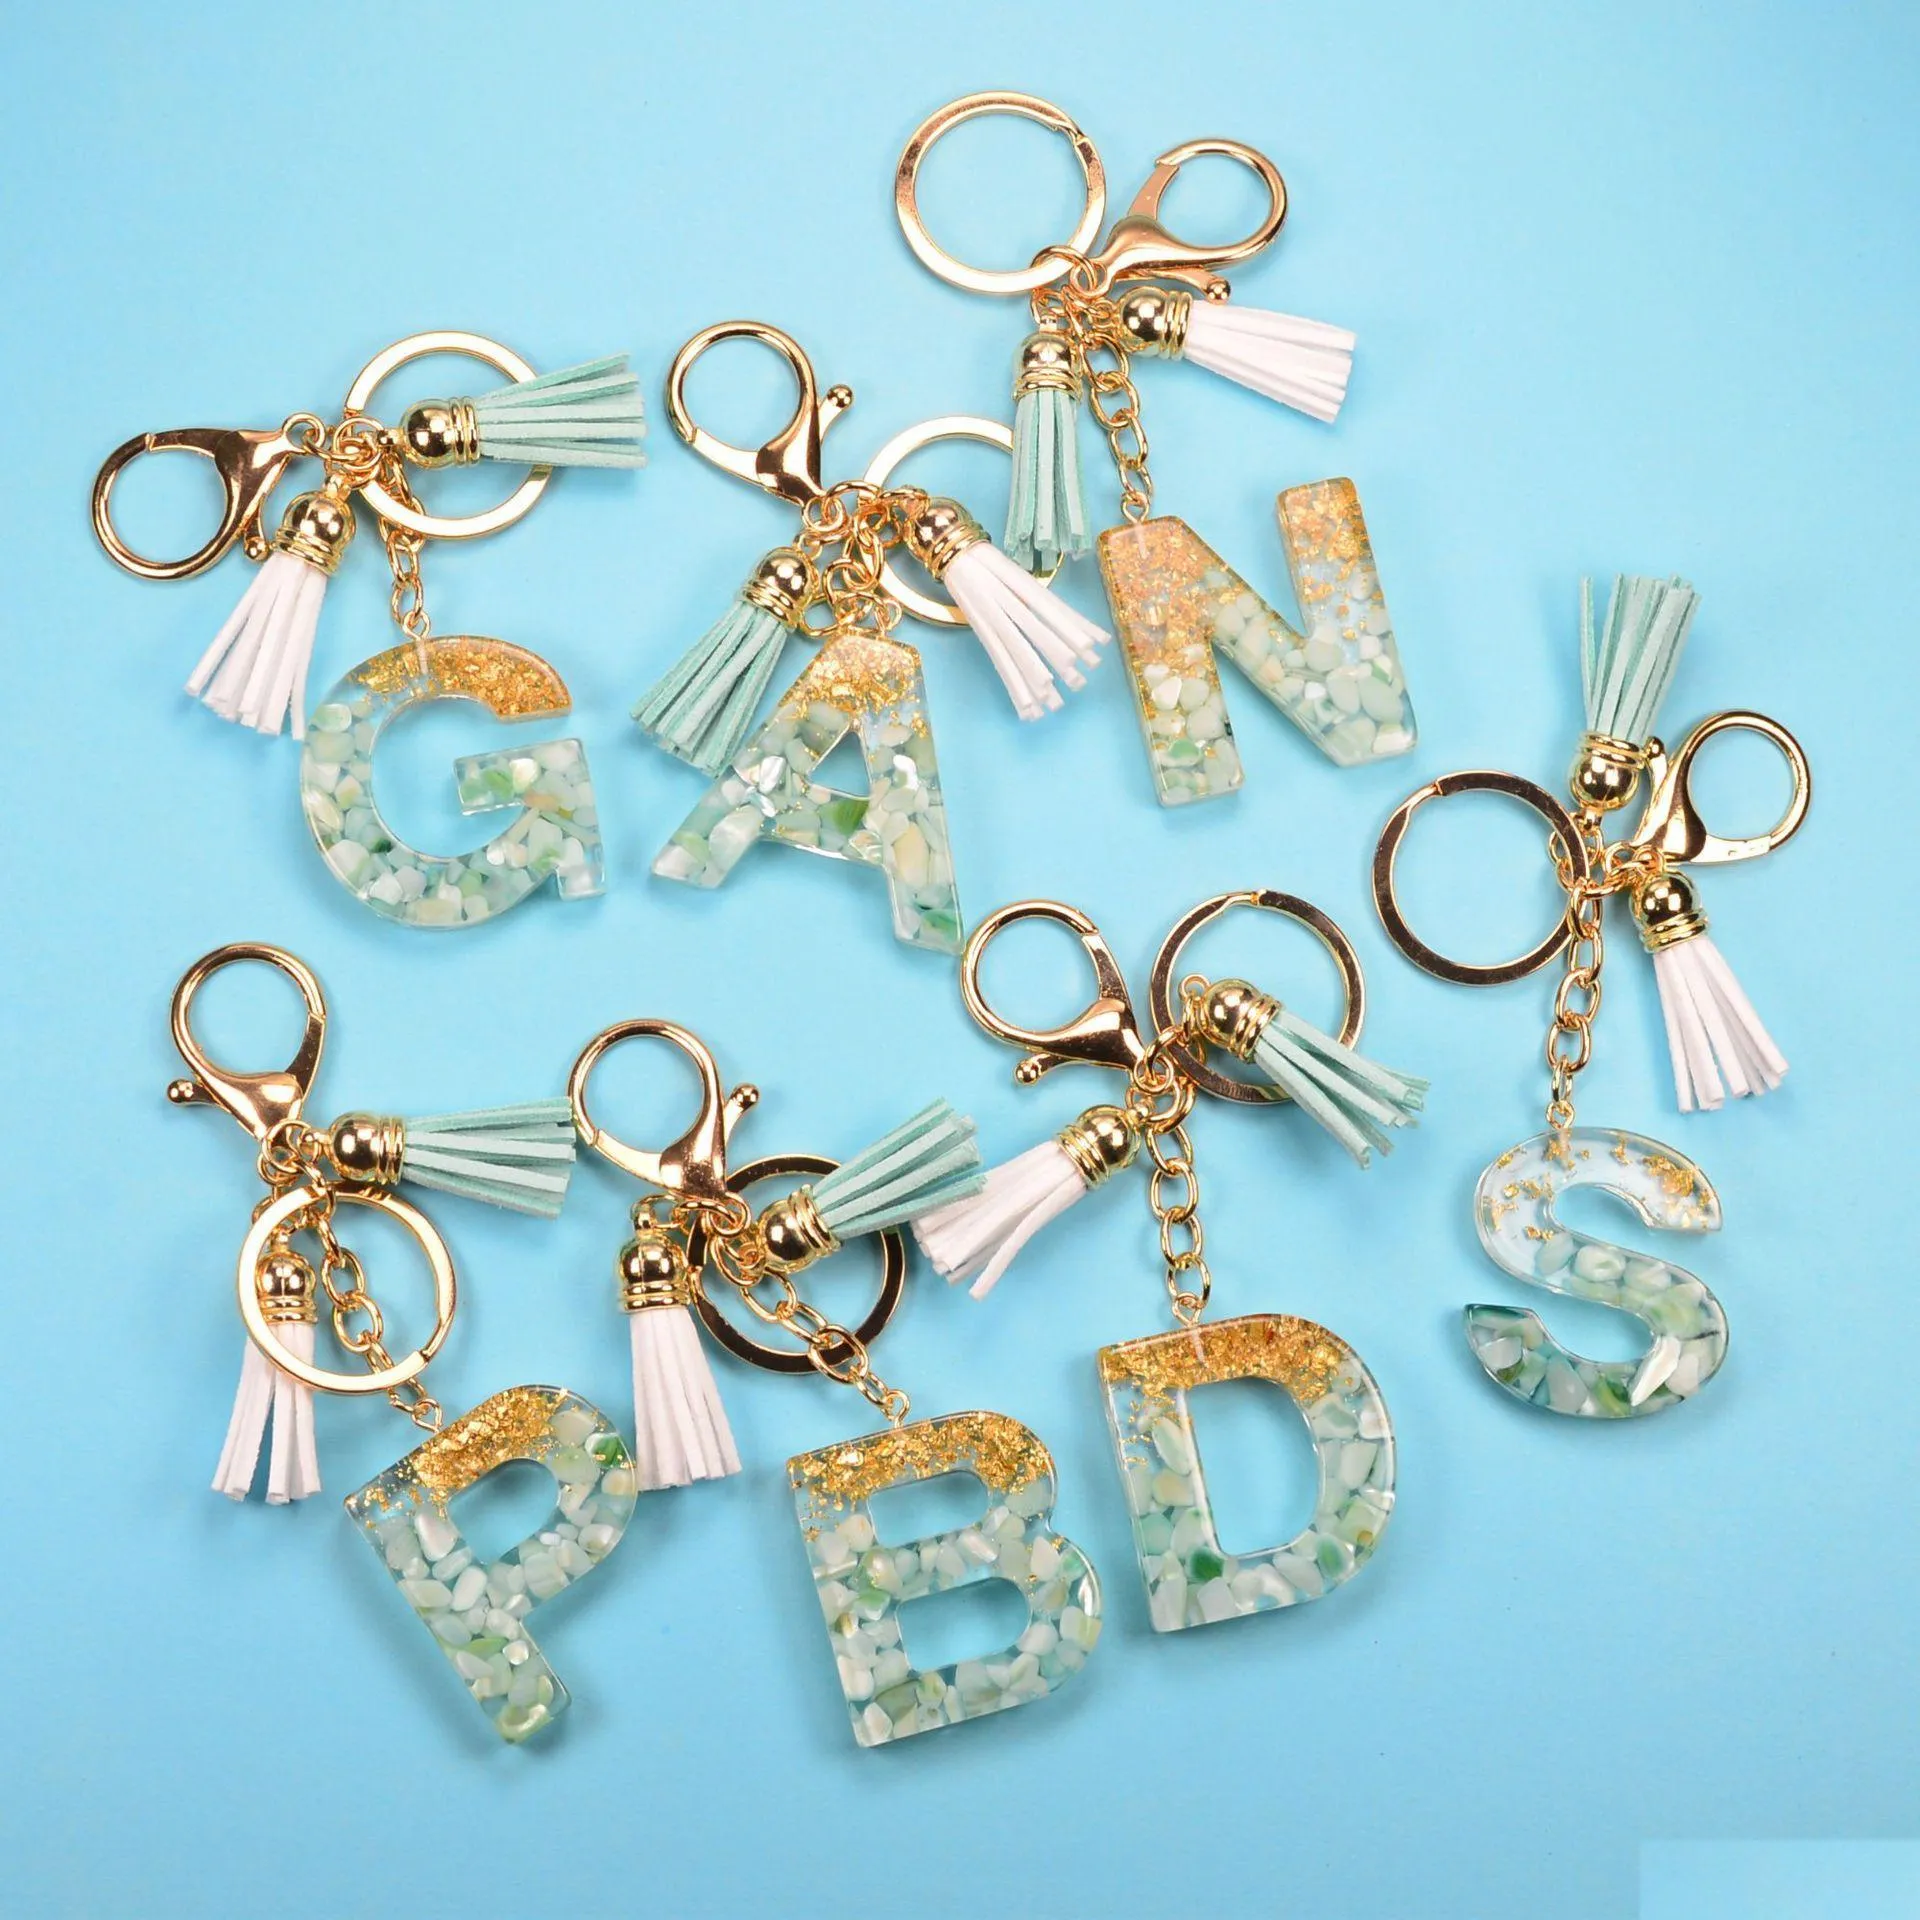 Keychains Lanyards Fashion 26 Letters Resin Keychains For Women Gold Foil Bag Pendant Charms Handbag Accessories Tassel Key Rings Dhezn